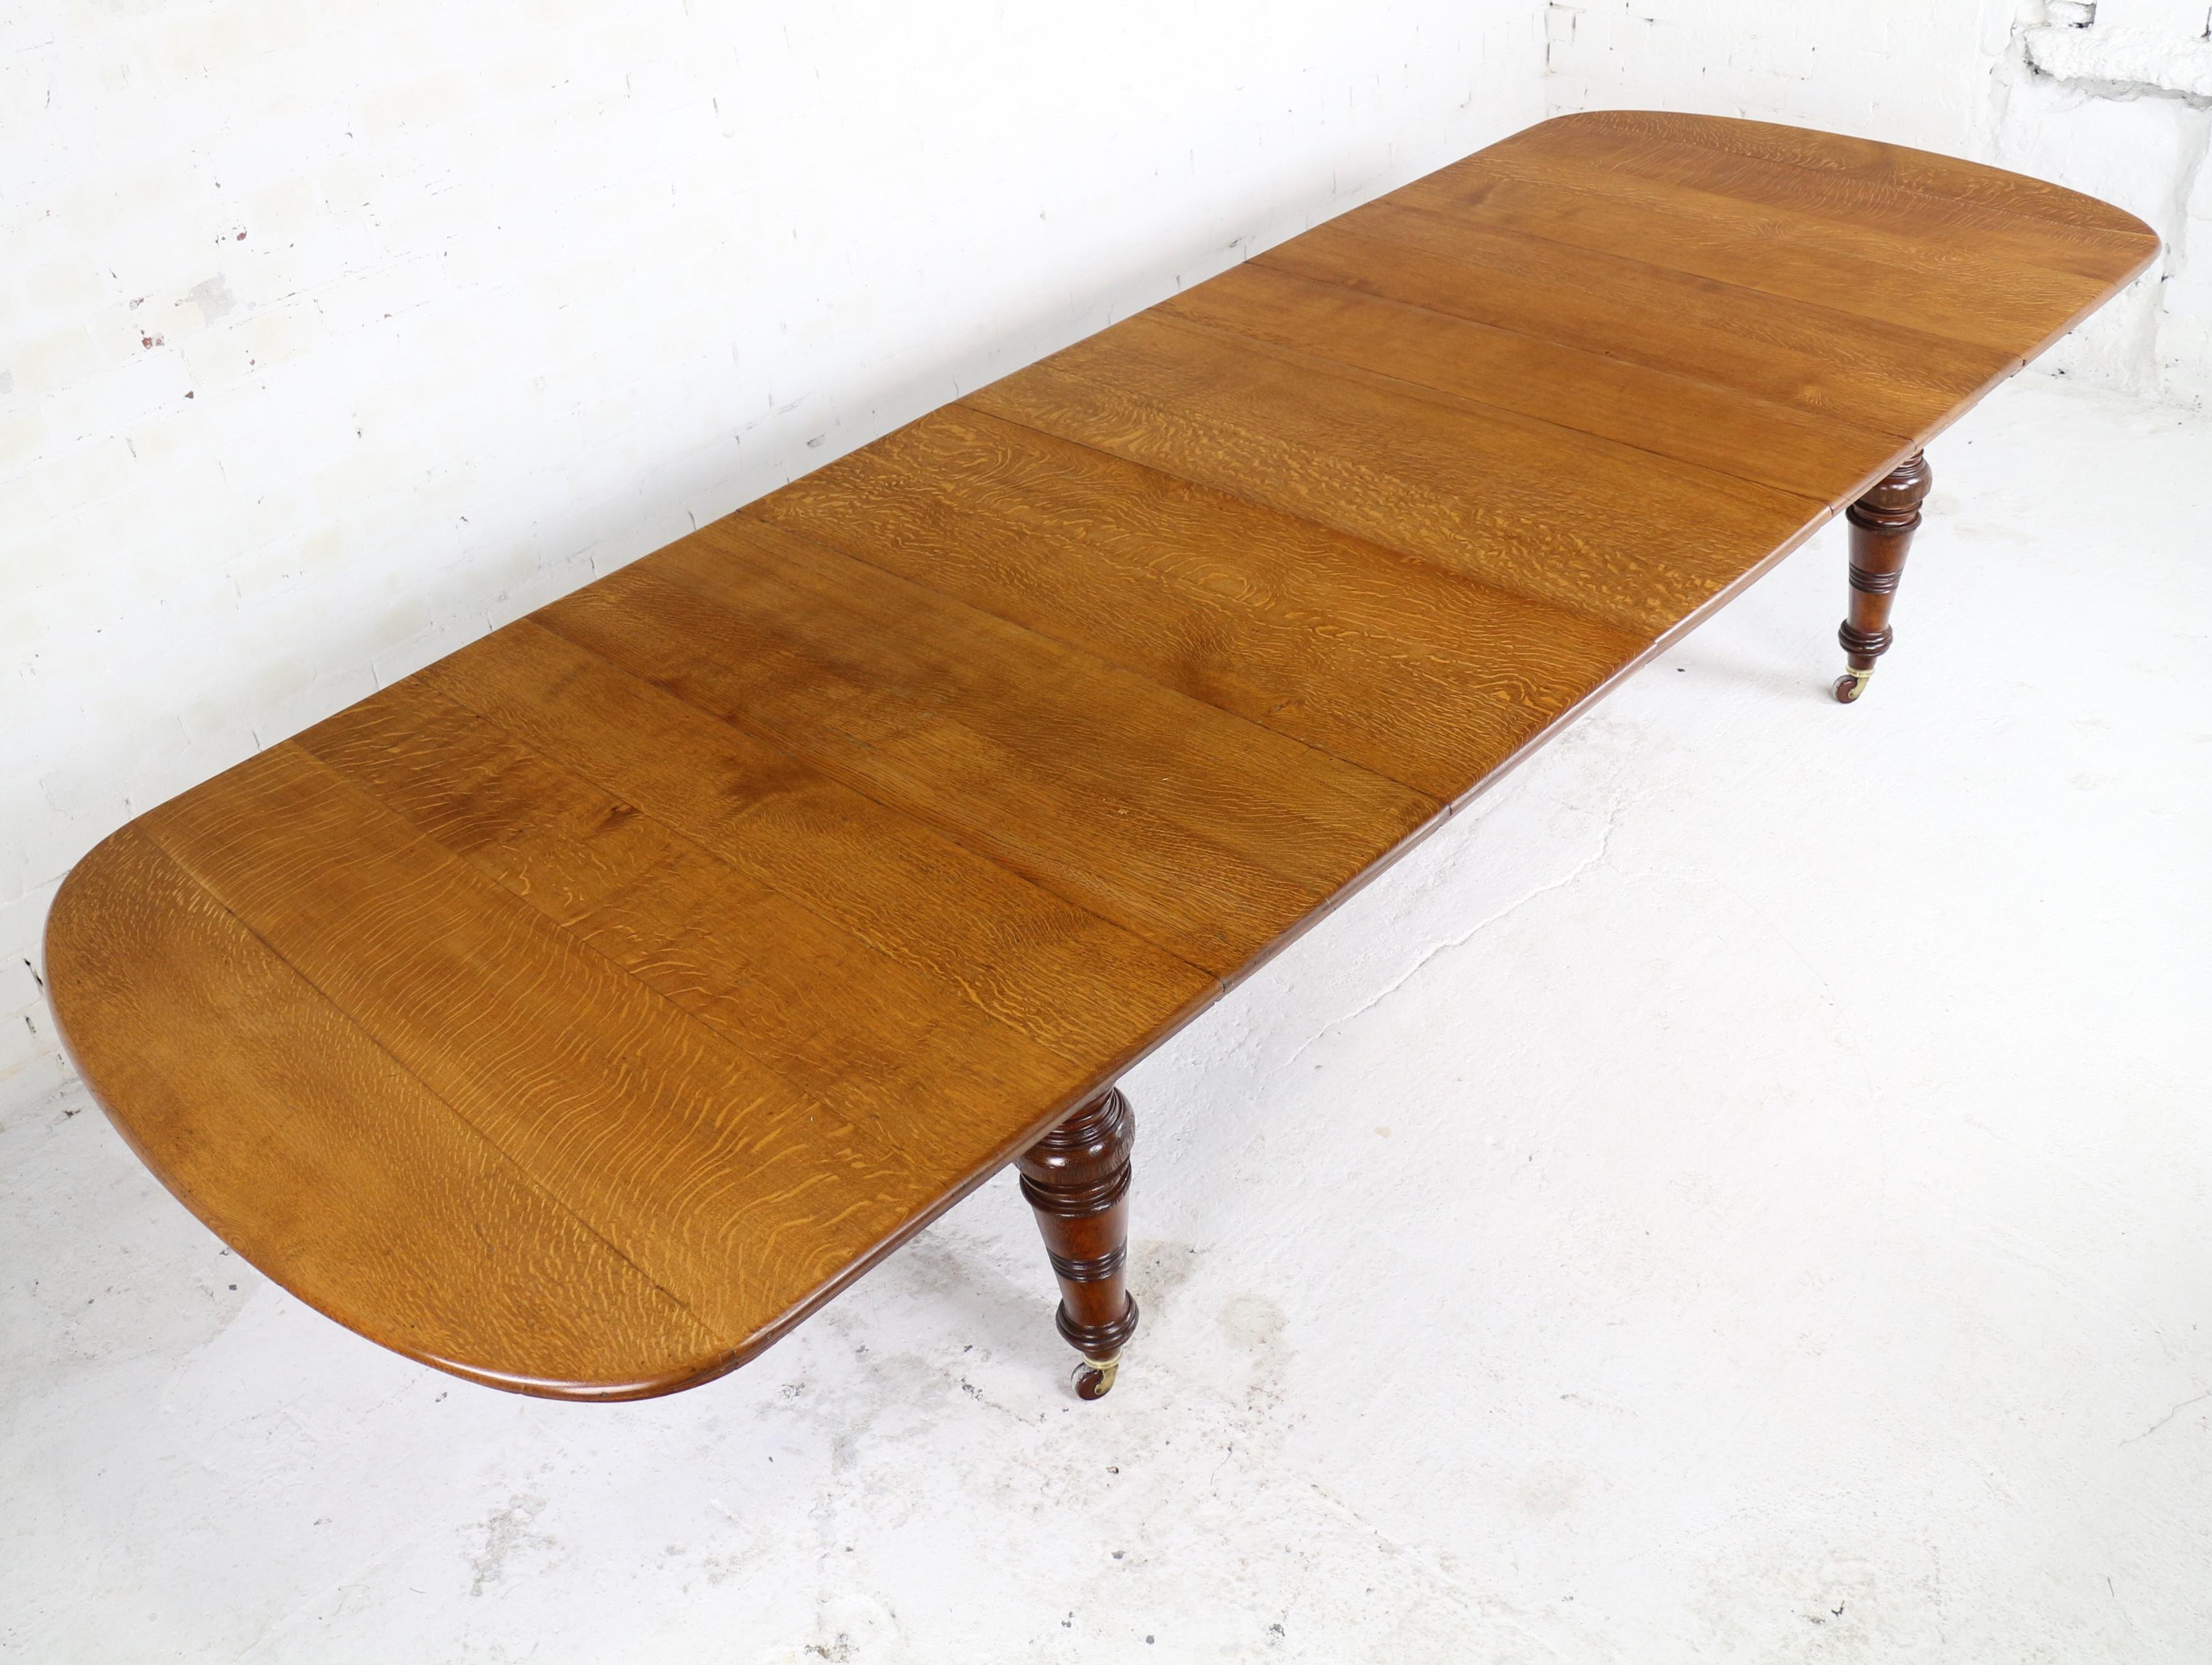 A substantially made early Victorian wind-out extending dining table in golden quarter-sawn oak with five leaves. With a rounded rectangular top finished with a moulded edge and frieze, this large table smoothly extends from 5ft 7¼in to 12ft using a